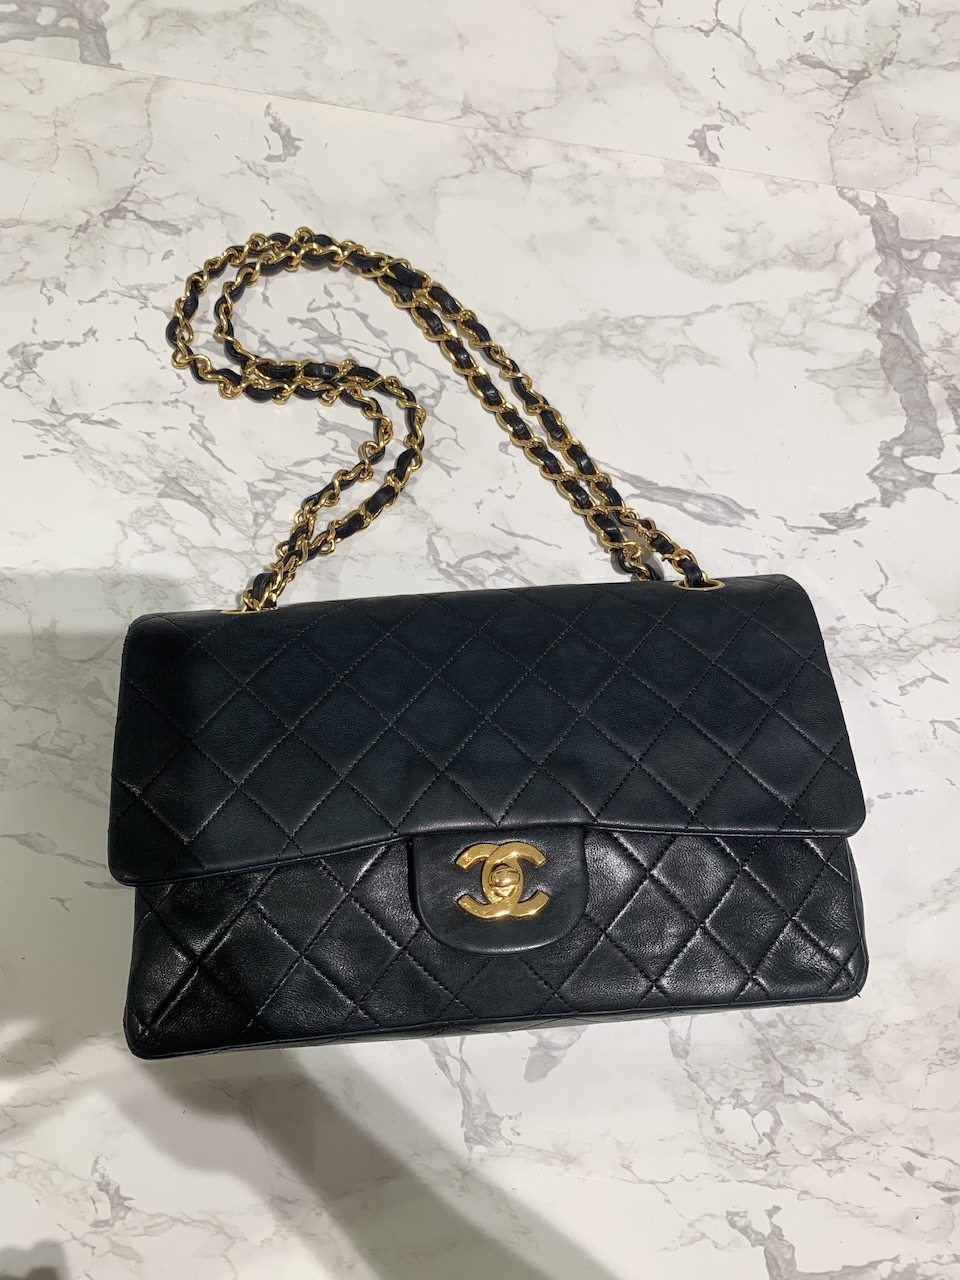 Chanel Lambskin Flap with Gold Hardware 